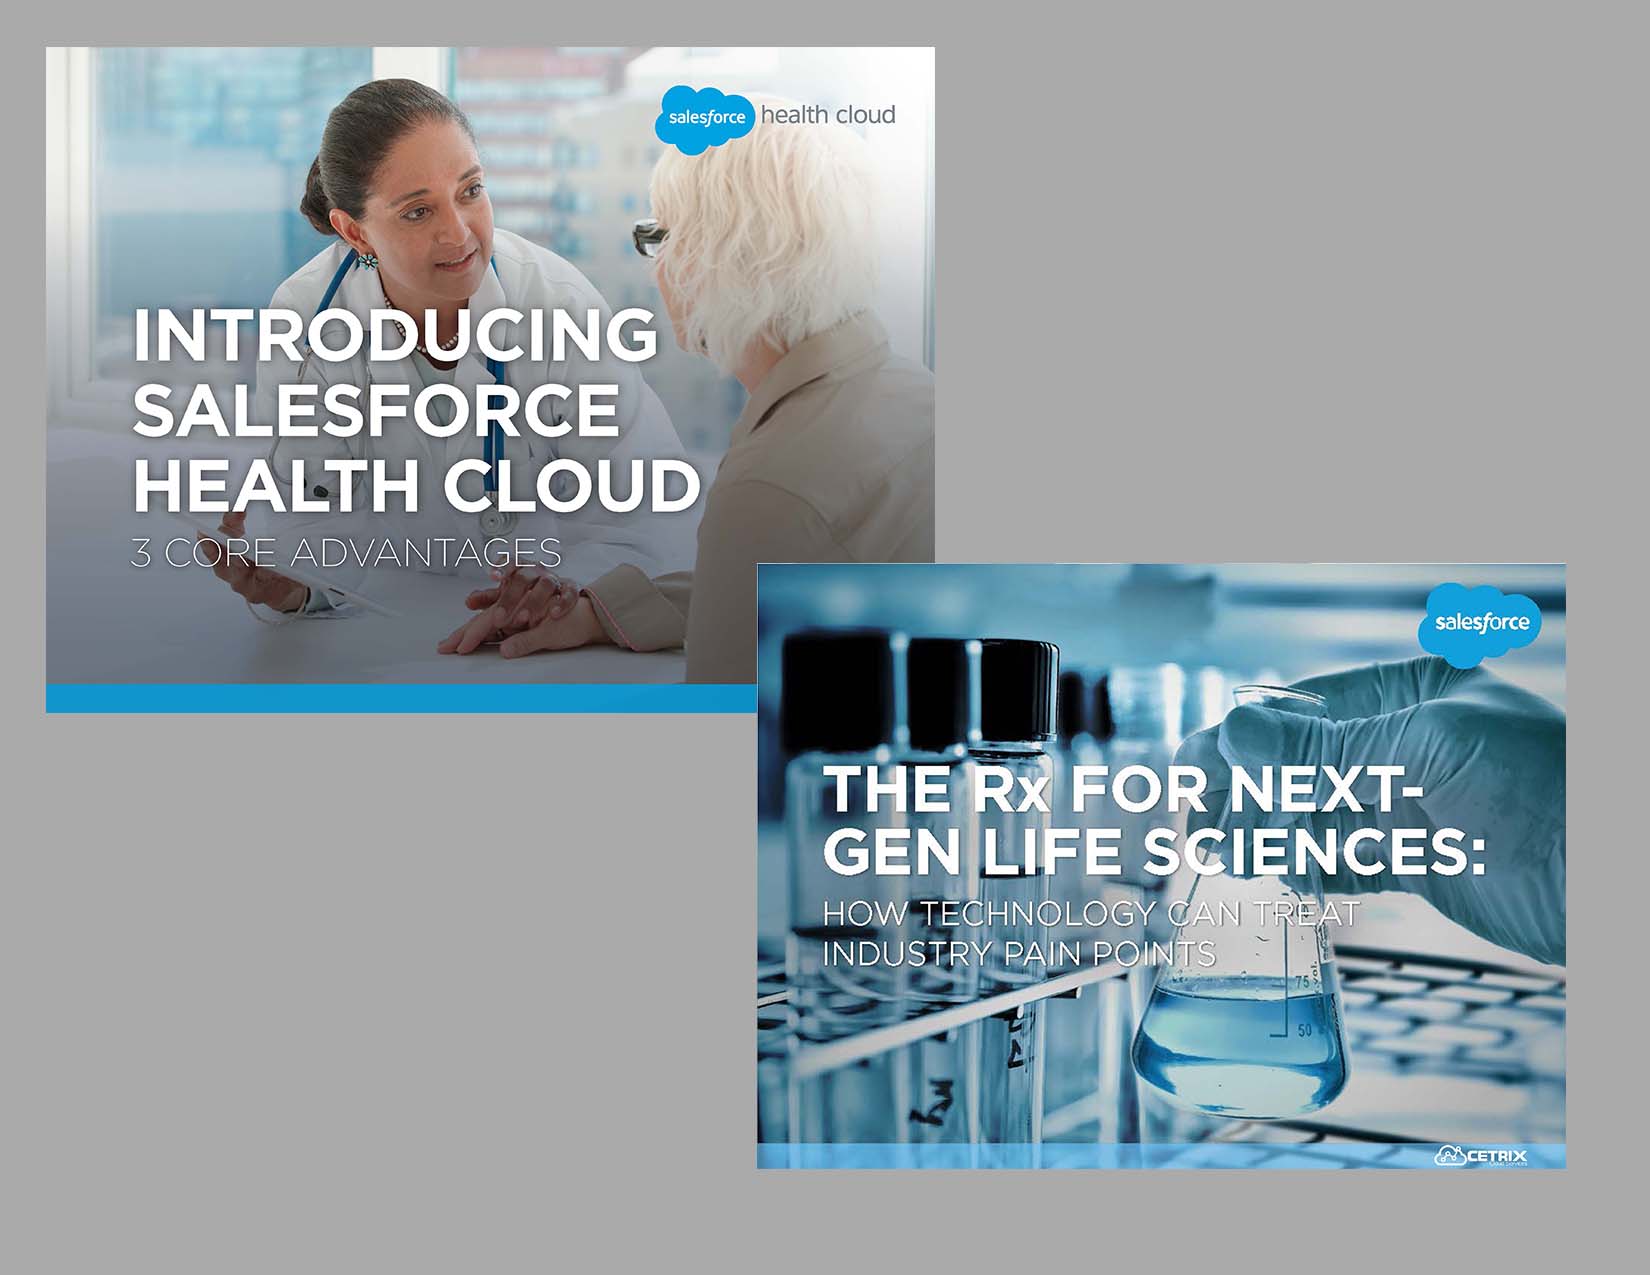 Salesforce for healthcare and life sciences